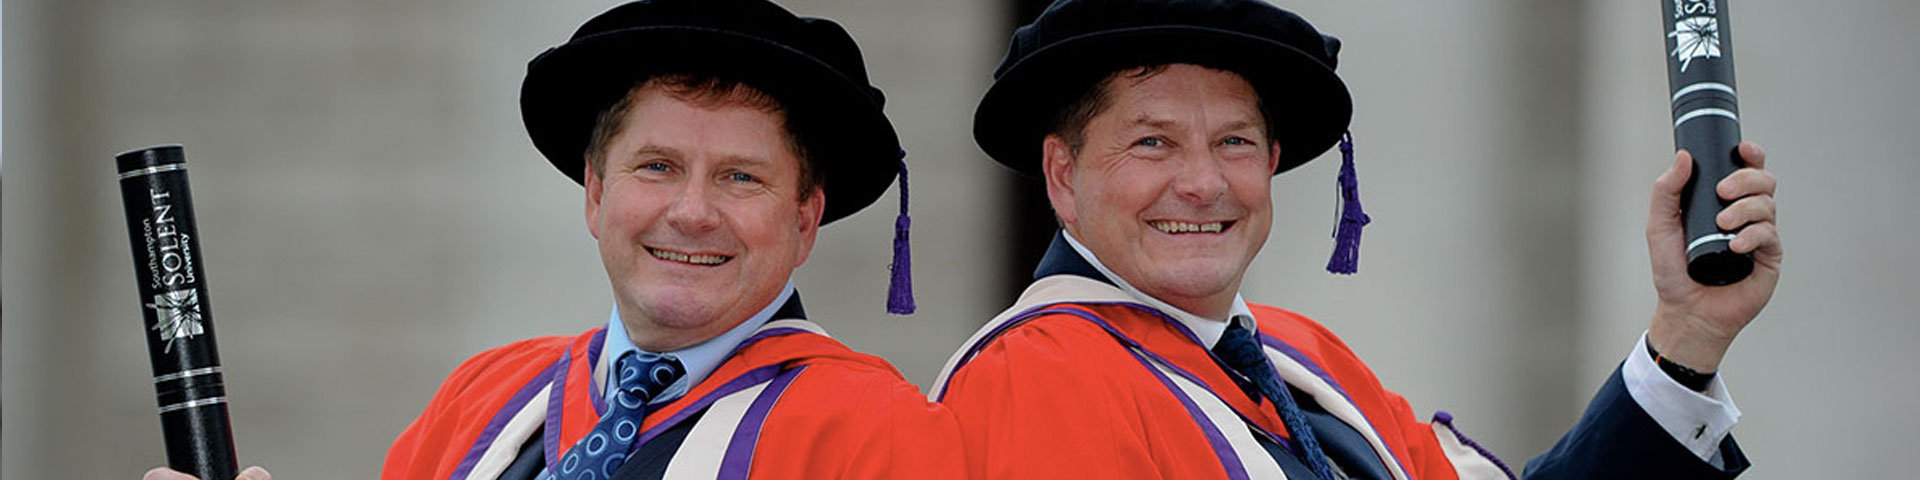 Pete and Pip Tyler with their honorary degrees from Solent University